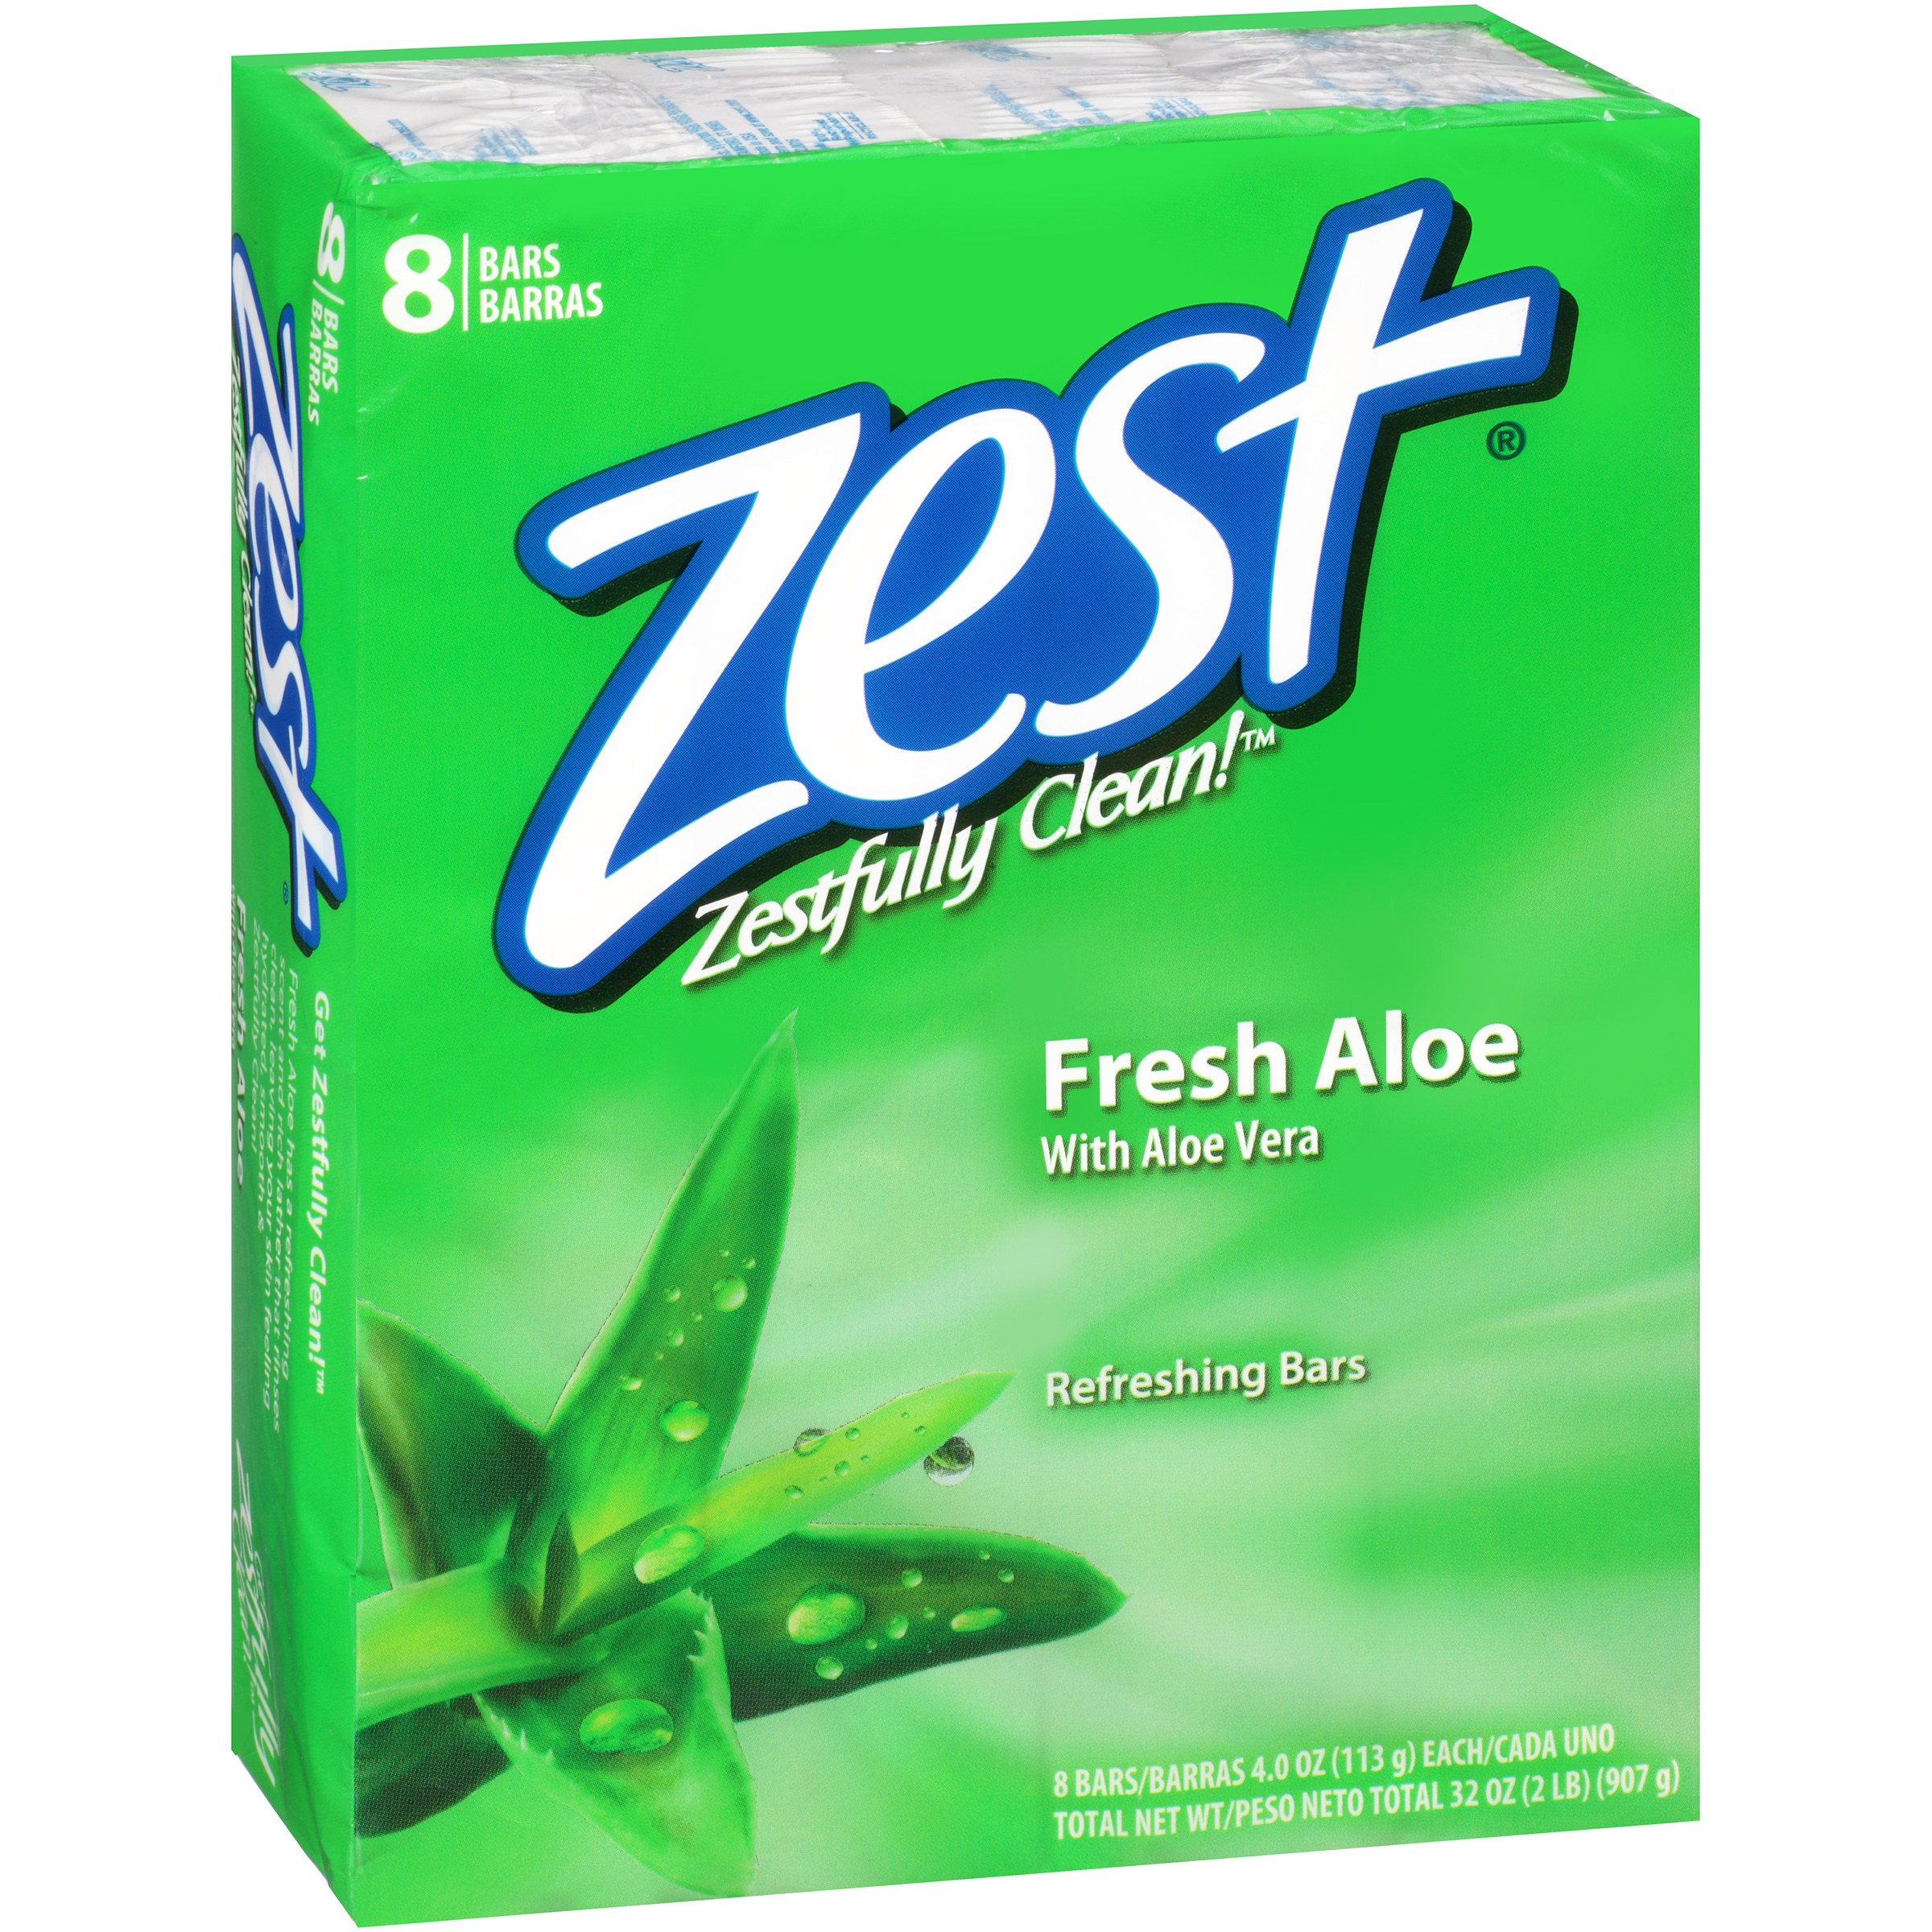 Zest Aloe Water & Pear Hydrating Deodorant Bar Soap, 4 oz., 8-Pack - image 1 of 7